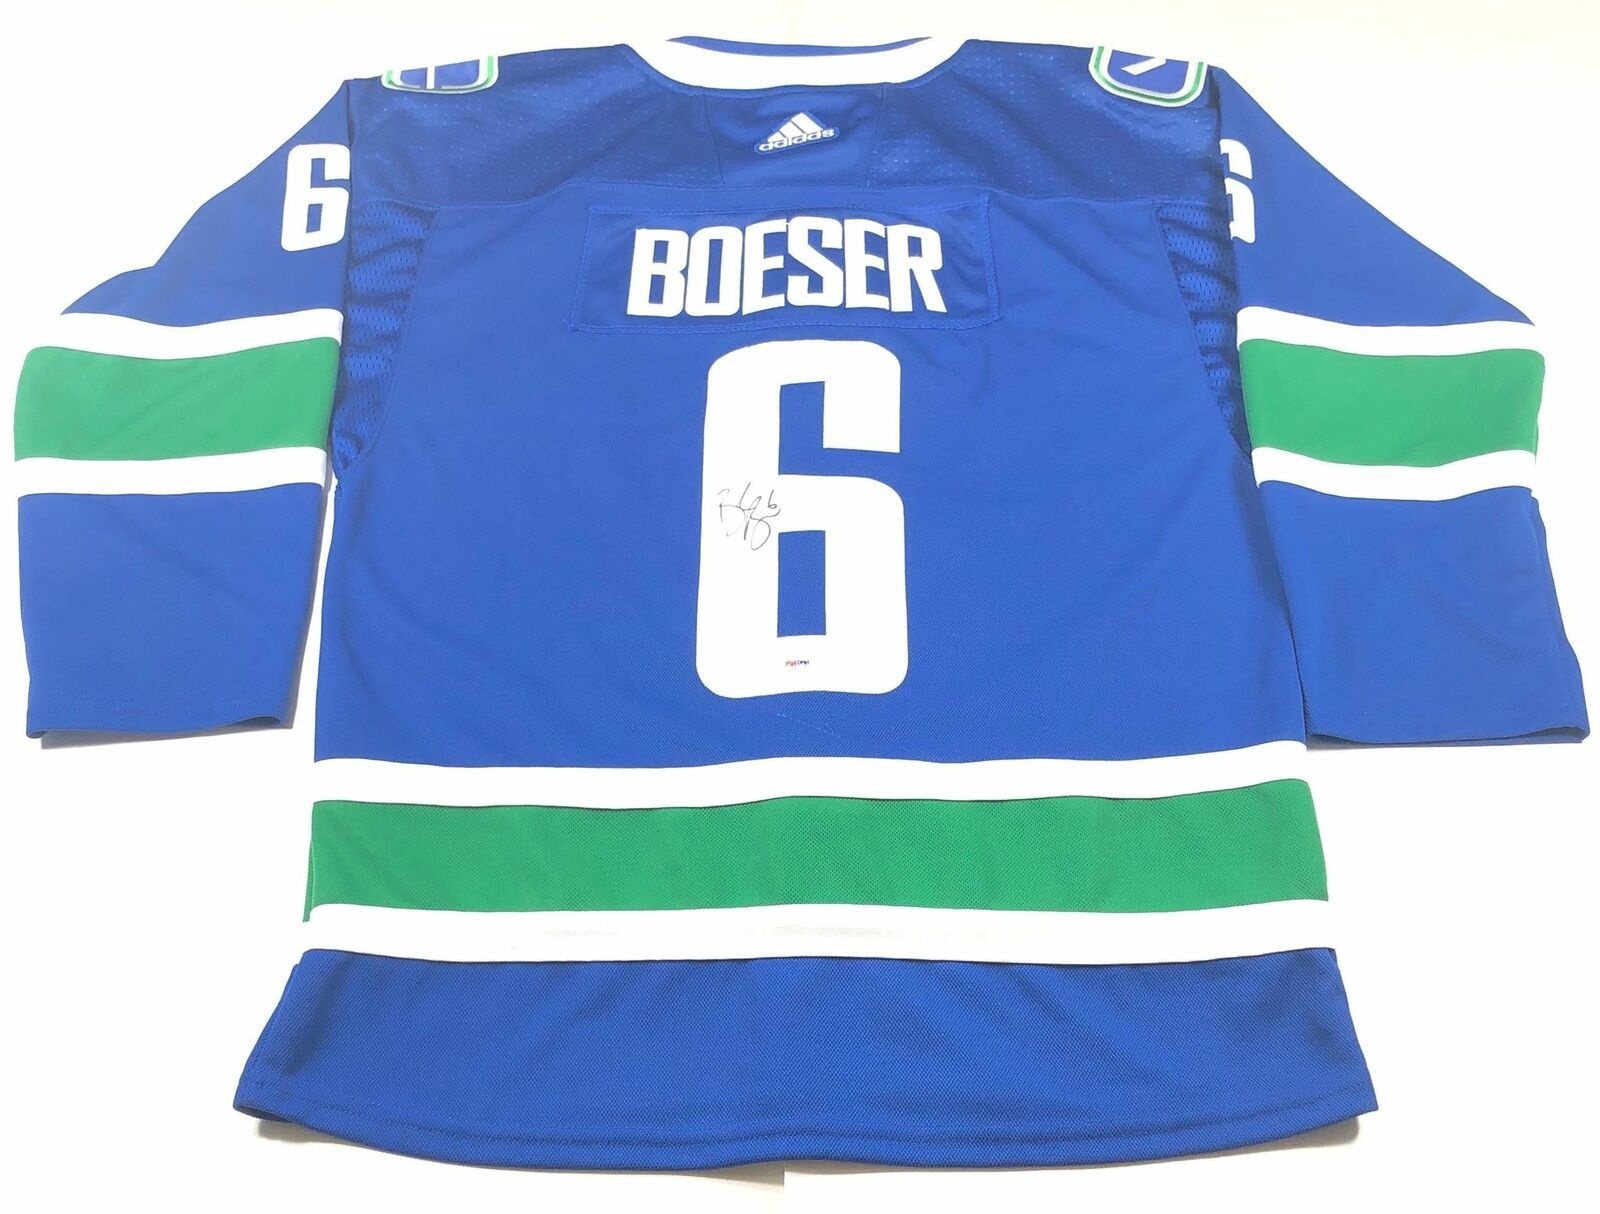 Primary image for Brock Boeser Signed Jersey PSA/DNA Vancouver Canucks Autographed